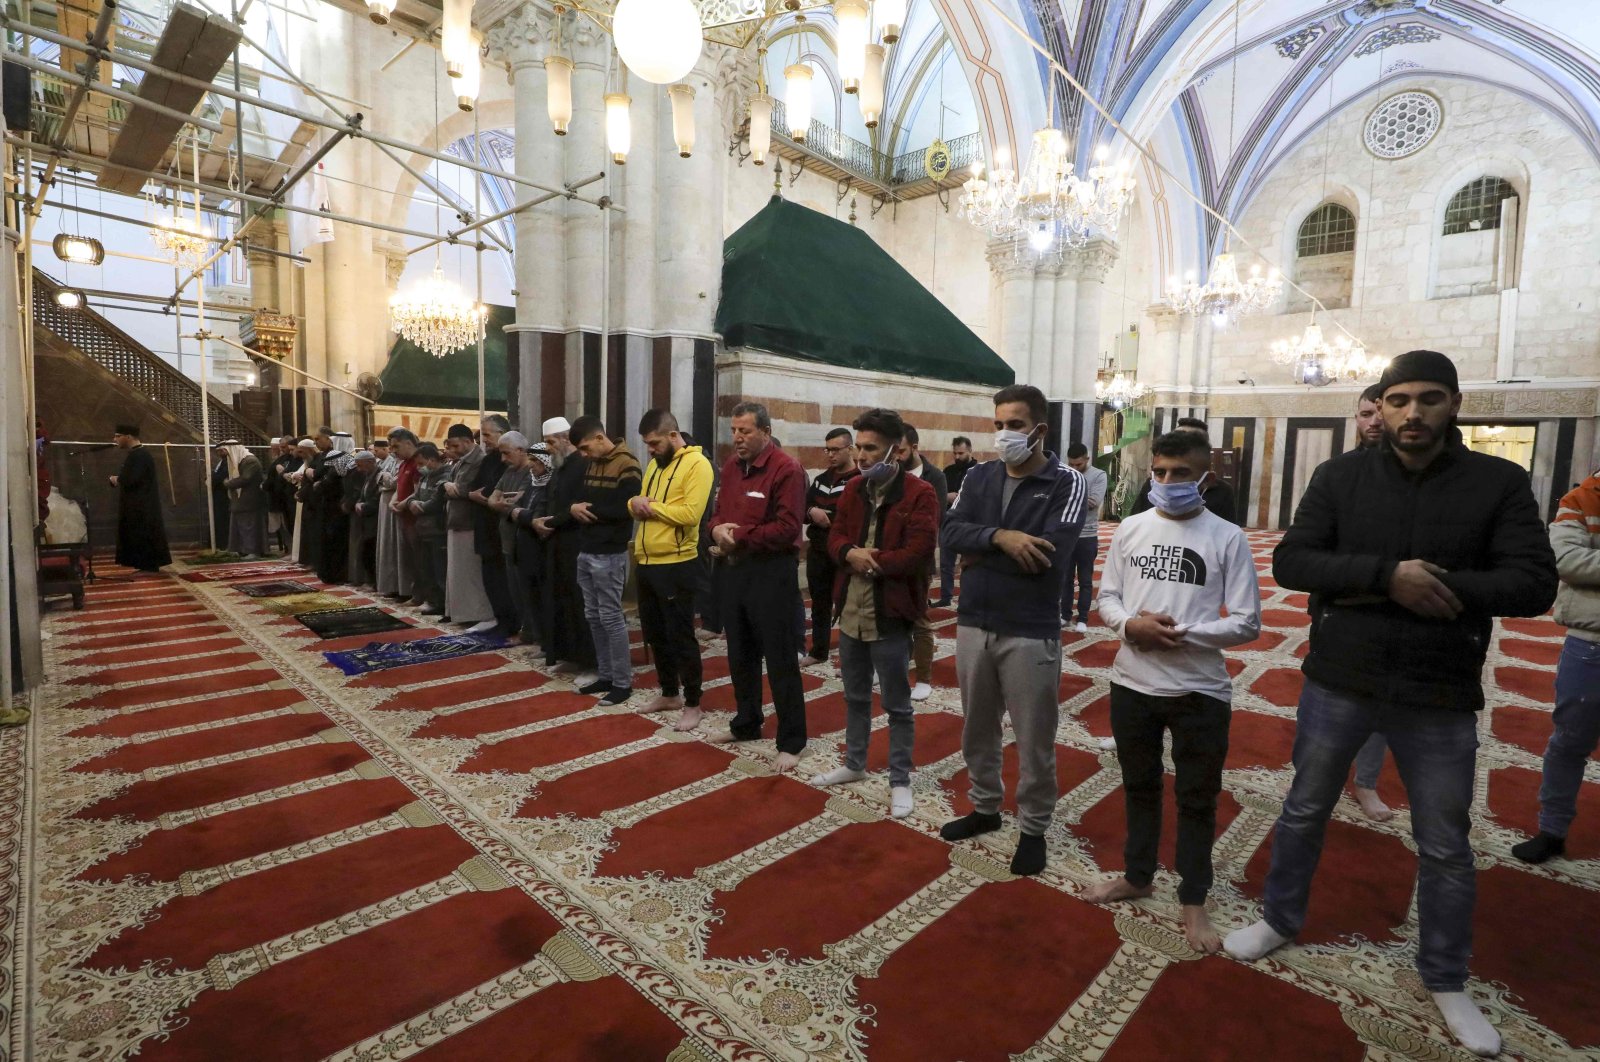 Palestinian men gather for dawn prayers at the Ibrahimi Mosque, Hebron, occupied West Bank, May 26, 2020. (AFP Photo)